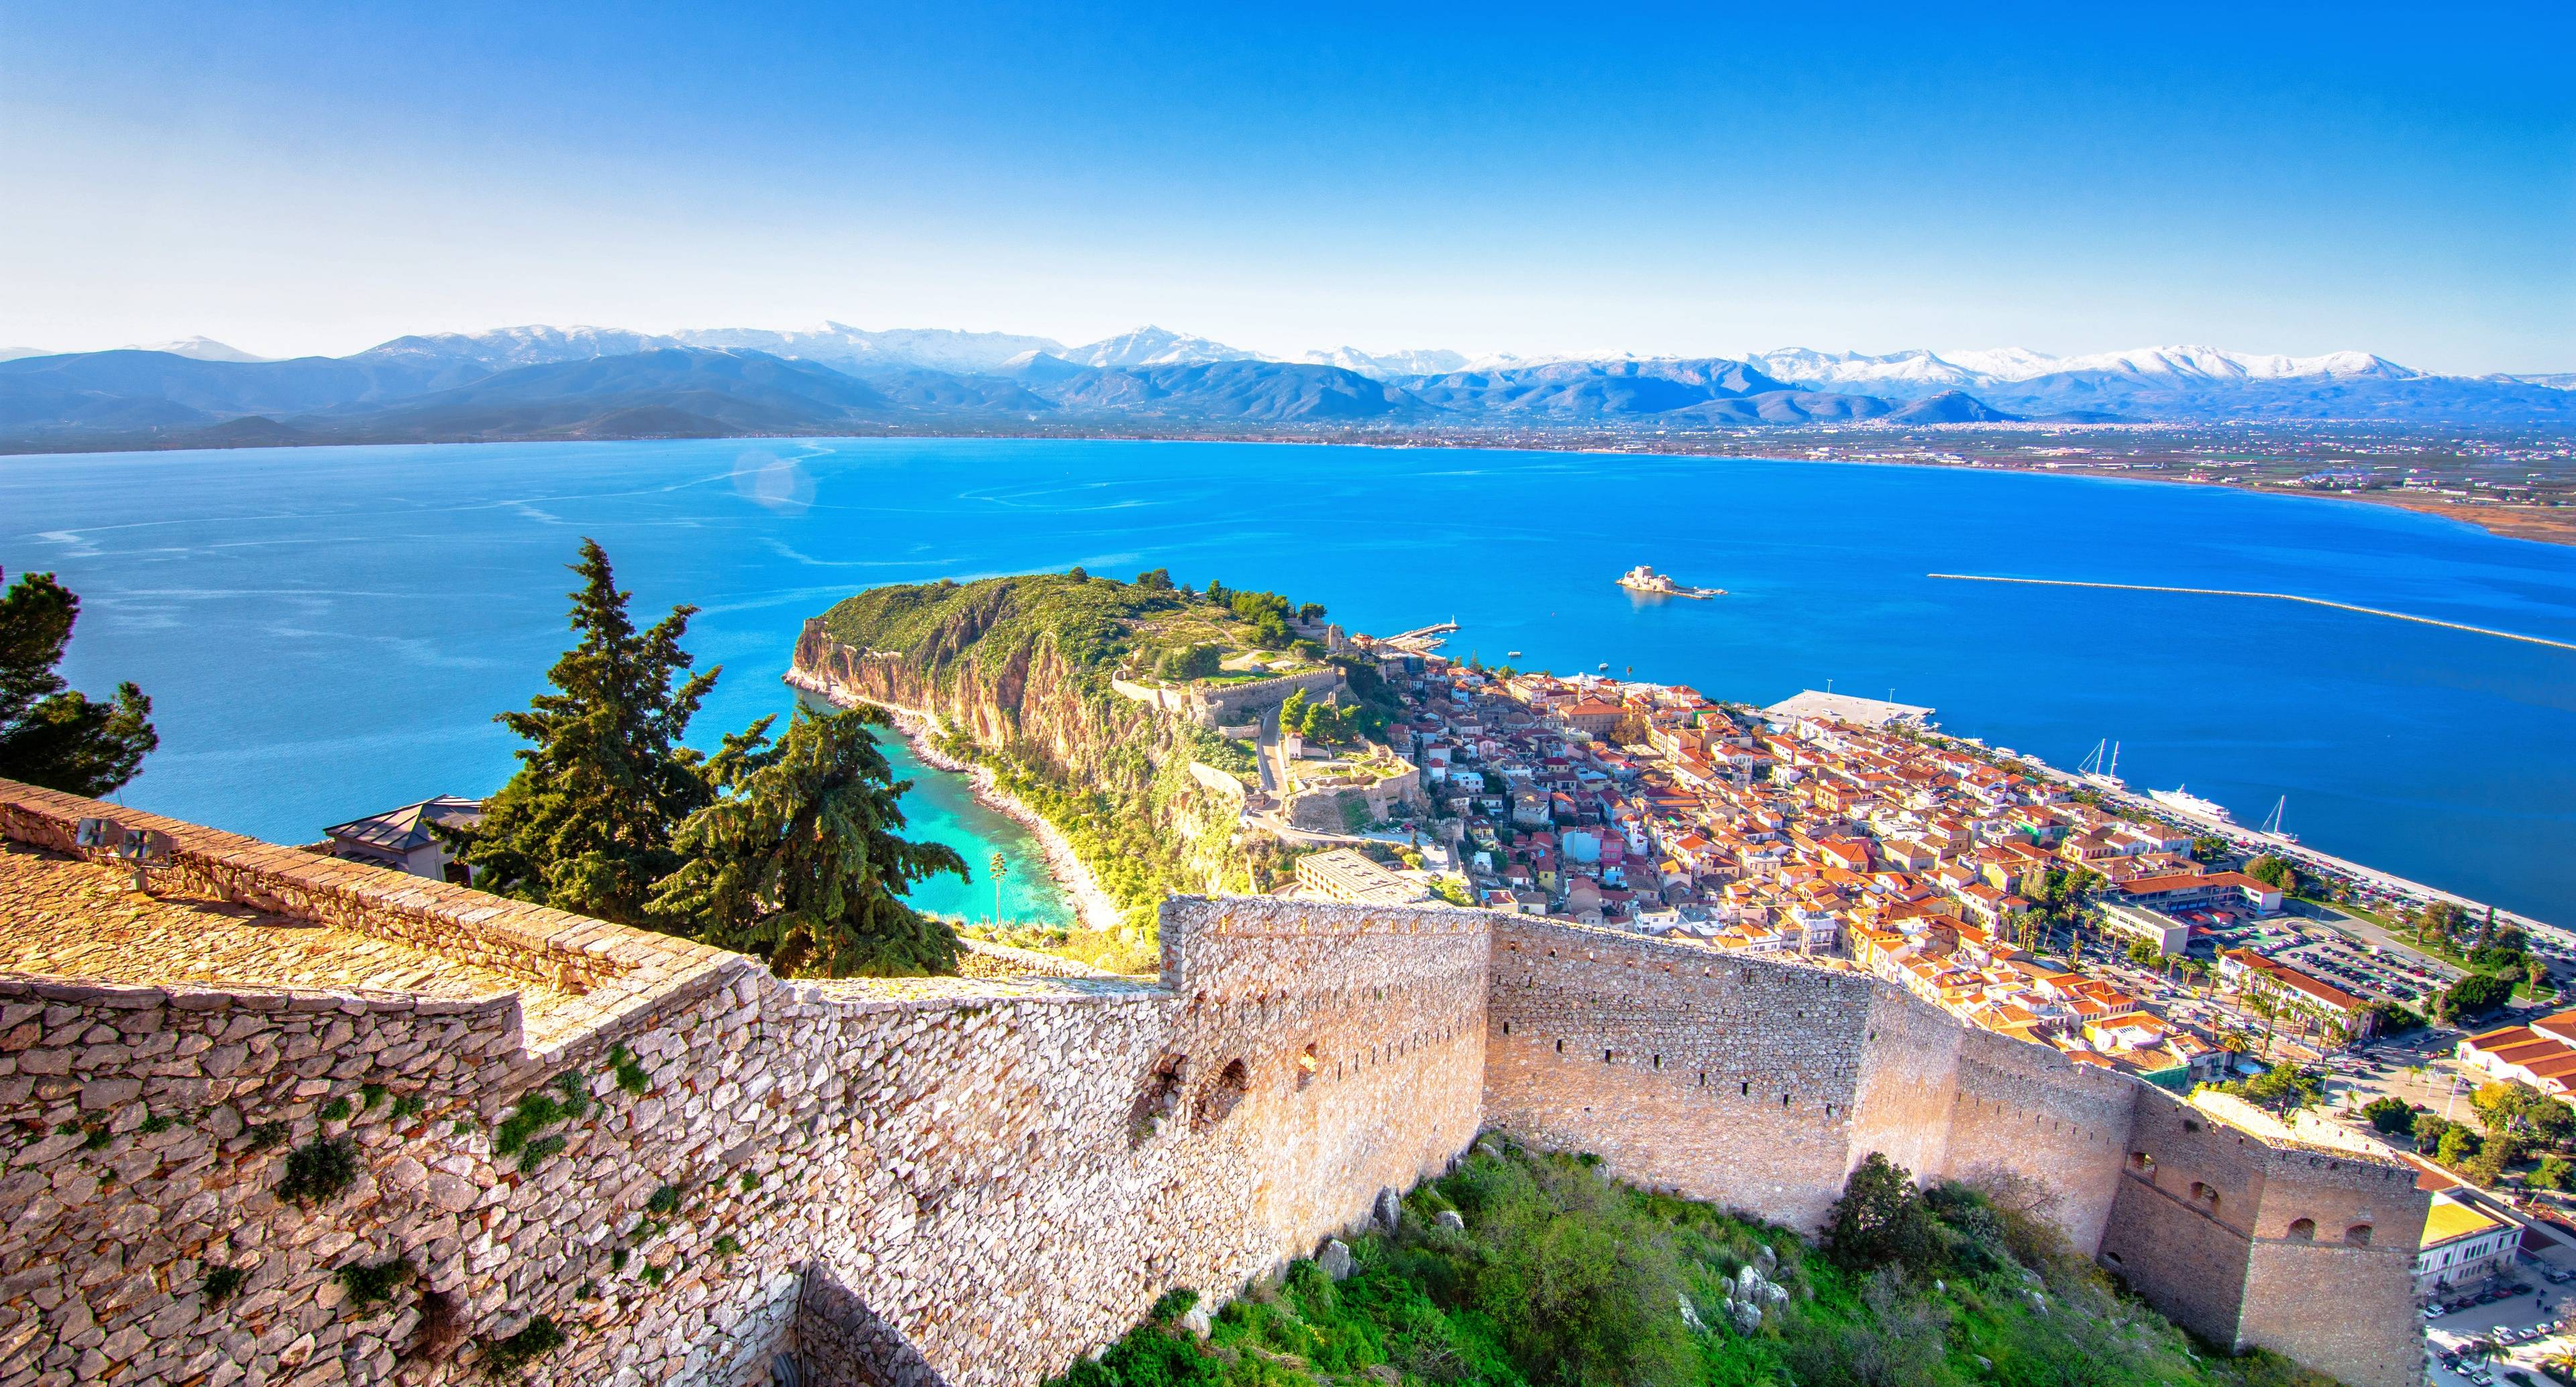 Getting a Taste of the Peloponnese: Castles, Ruins, Wine and Spas